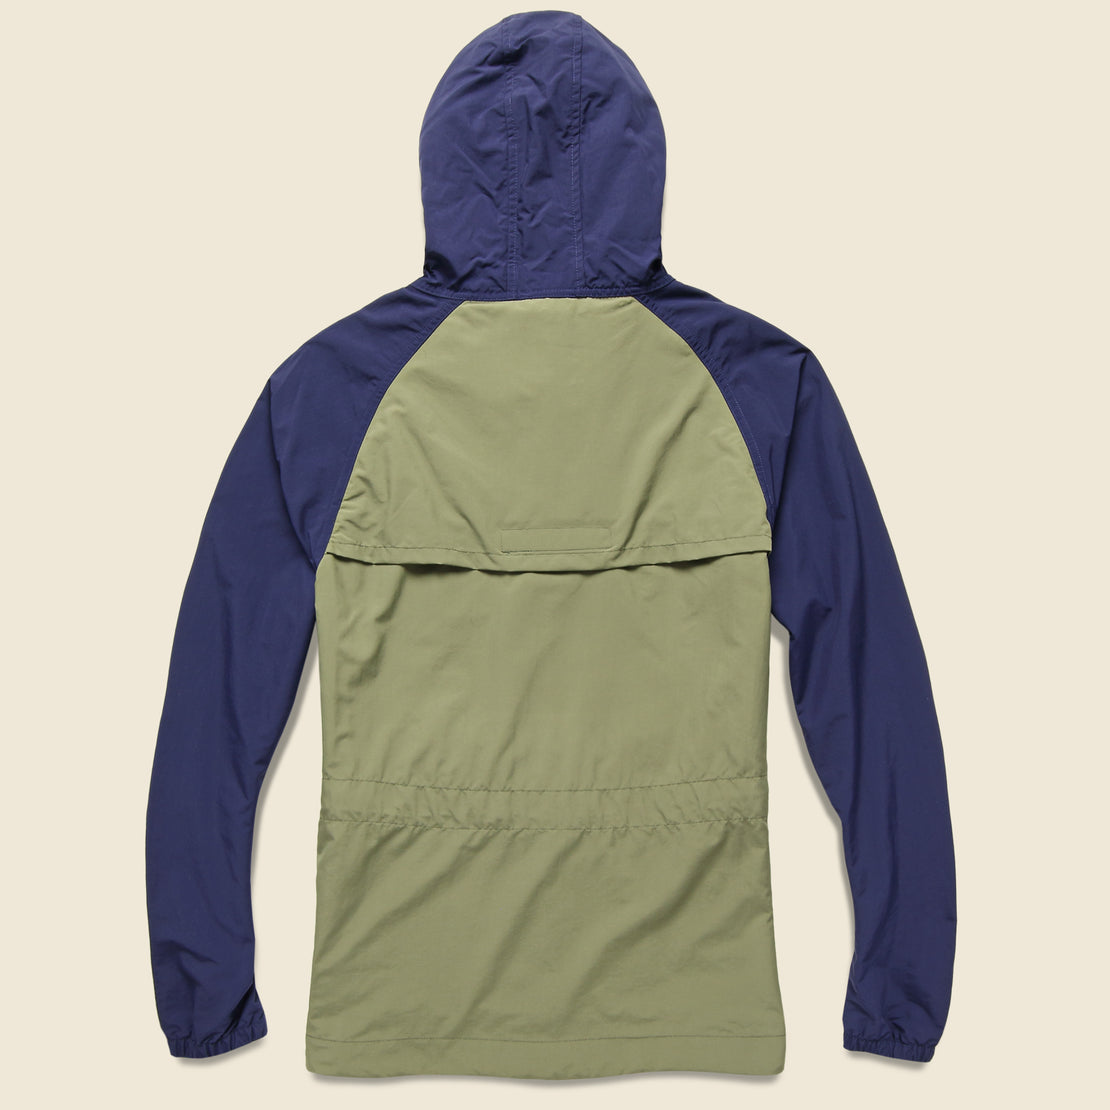 Pacjac Colorblock Jacket - Navy Olive